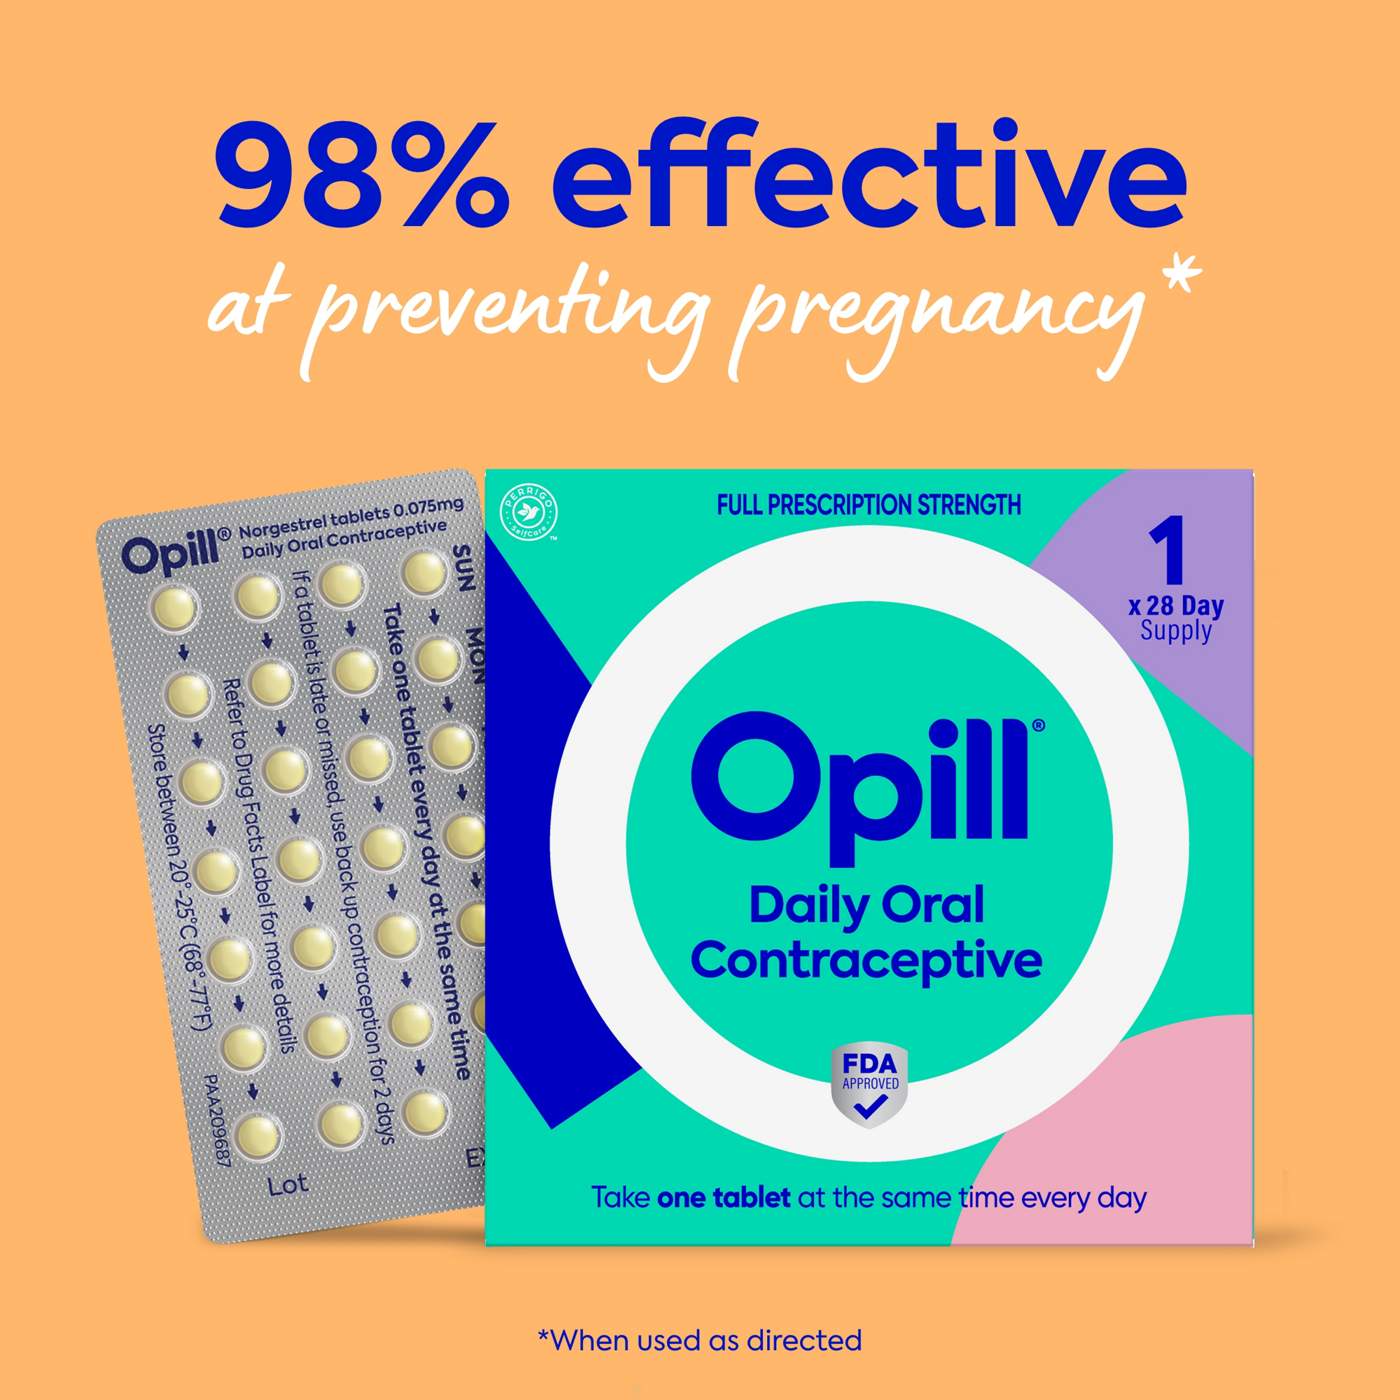 Opill Daily Oral Contraceptive Norgestrel Tablets - 0.075 mg; image 11 of 11